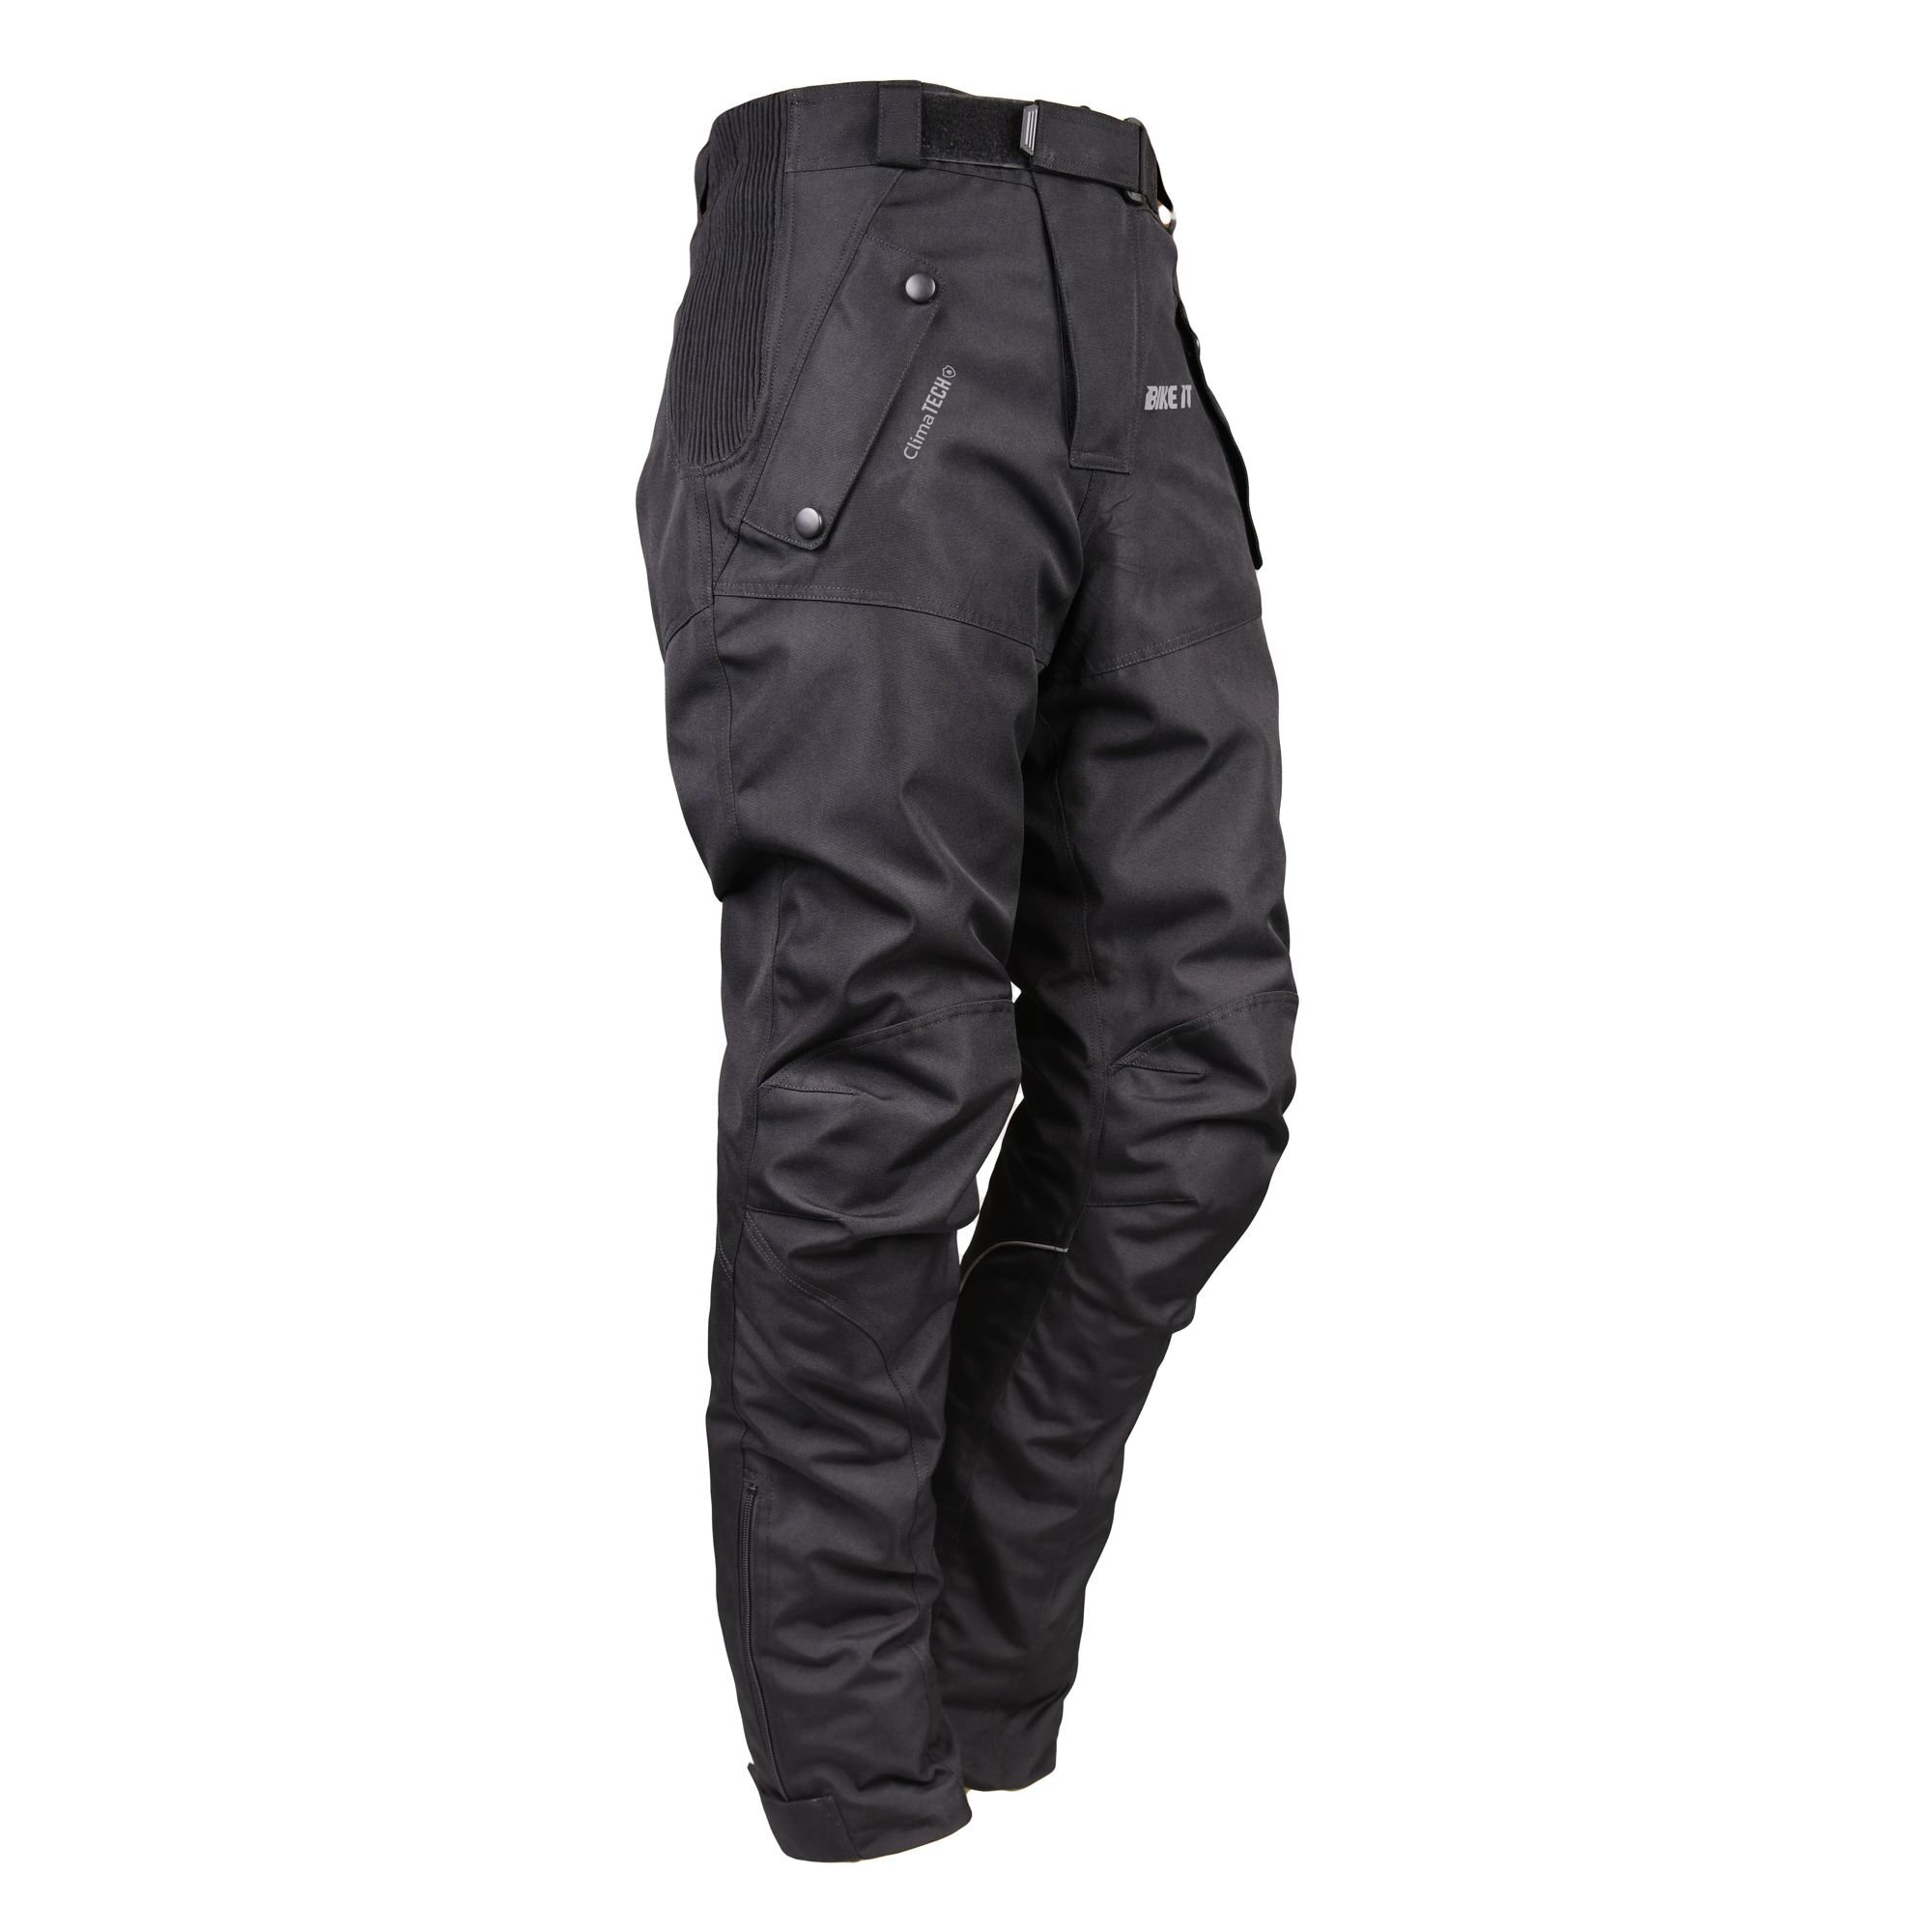 Motorcycle jeans at trade prices. Protective yet stylish. – Roadskin®